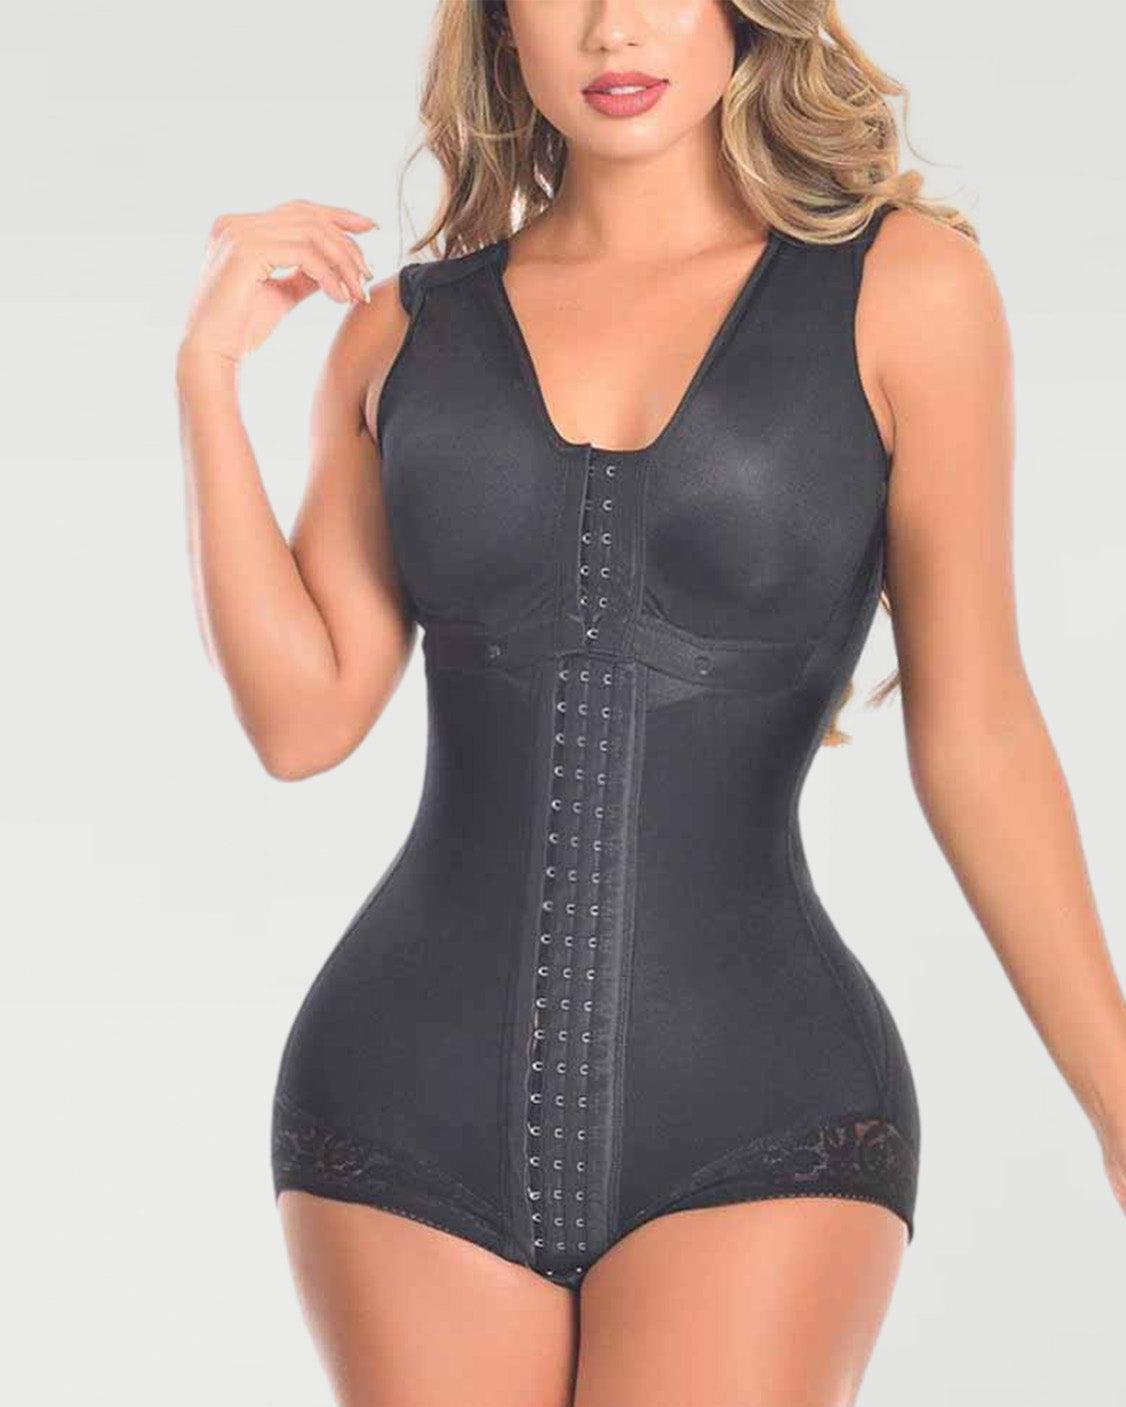 New Lolita Black Body With Luxury Molding Adjustable Front Closure Fajas Lace Body Shaper - Wishe